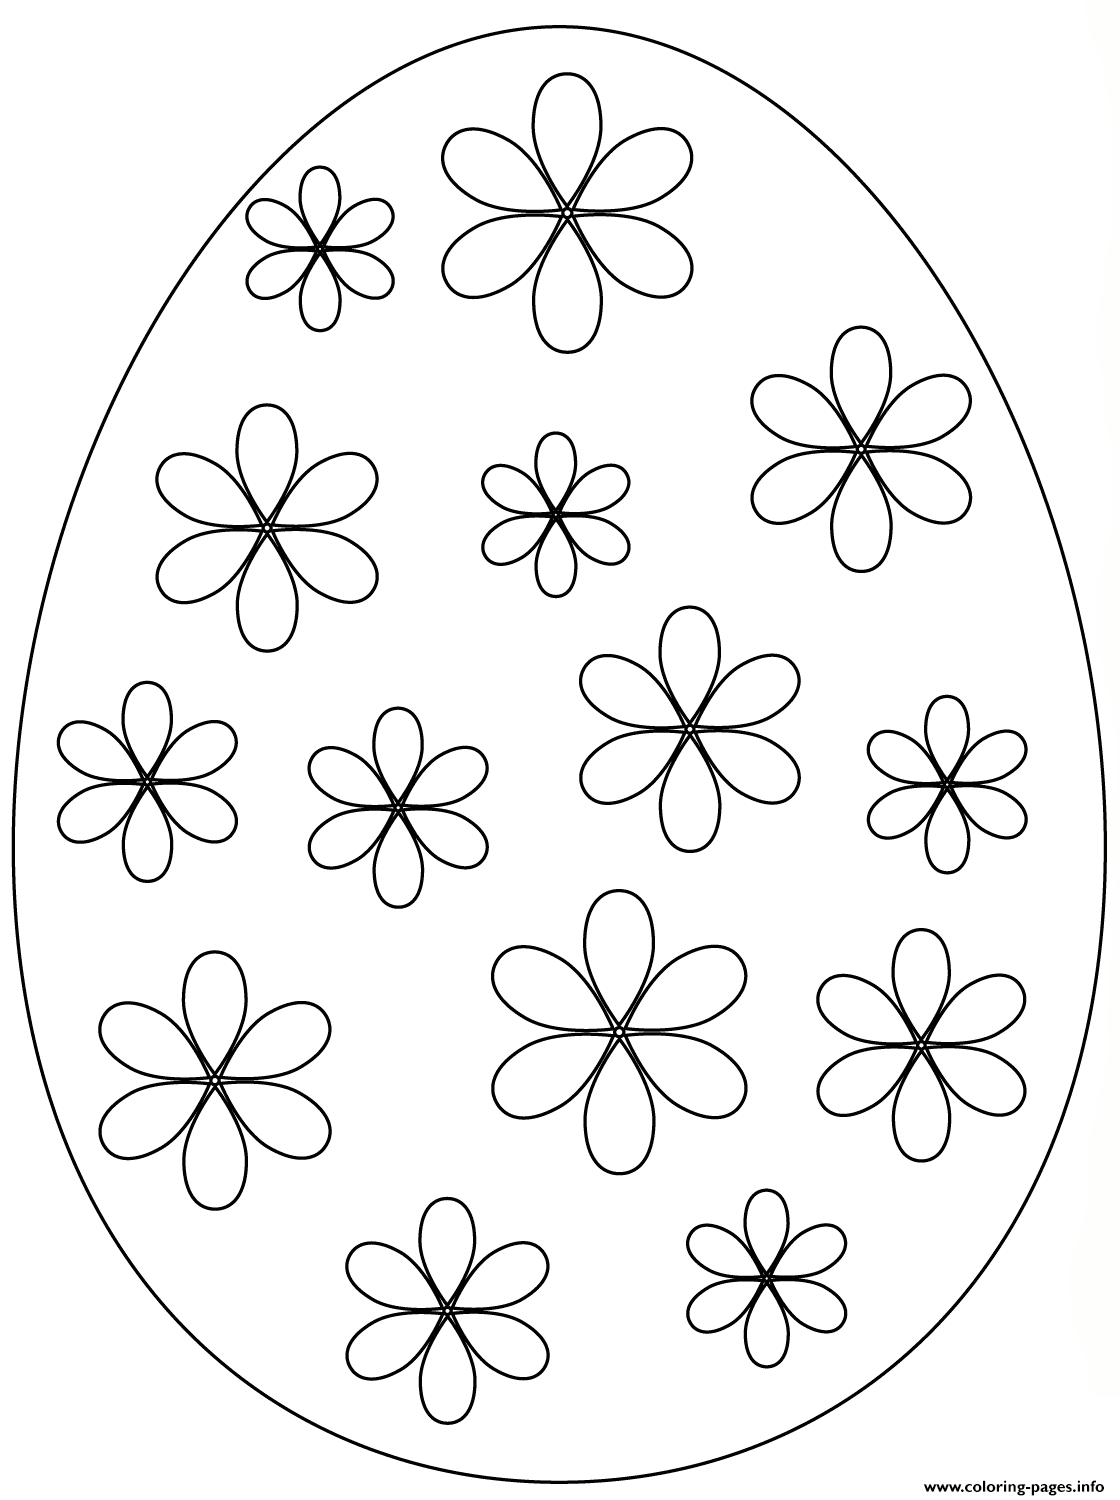 Easter Egg With Flowers coloring